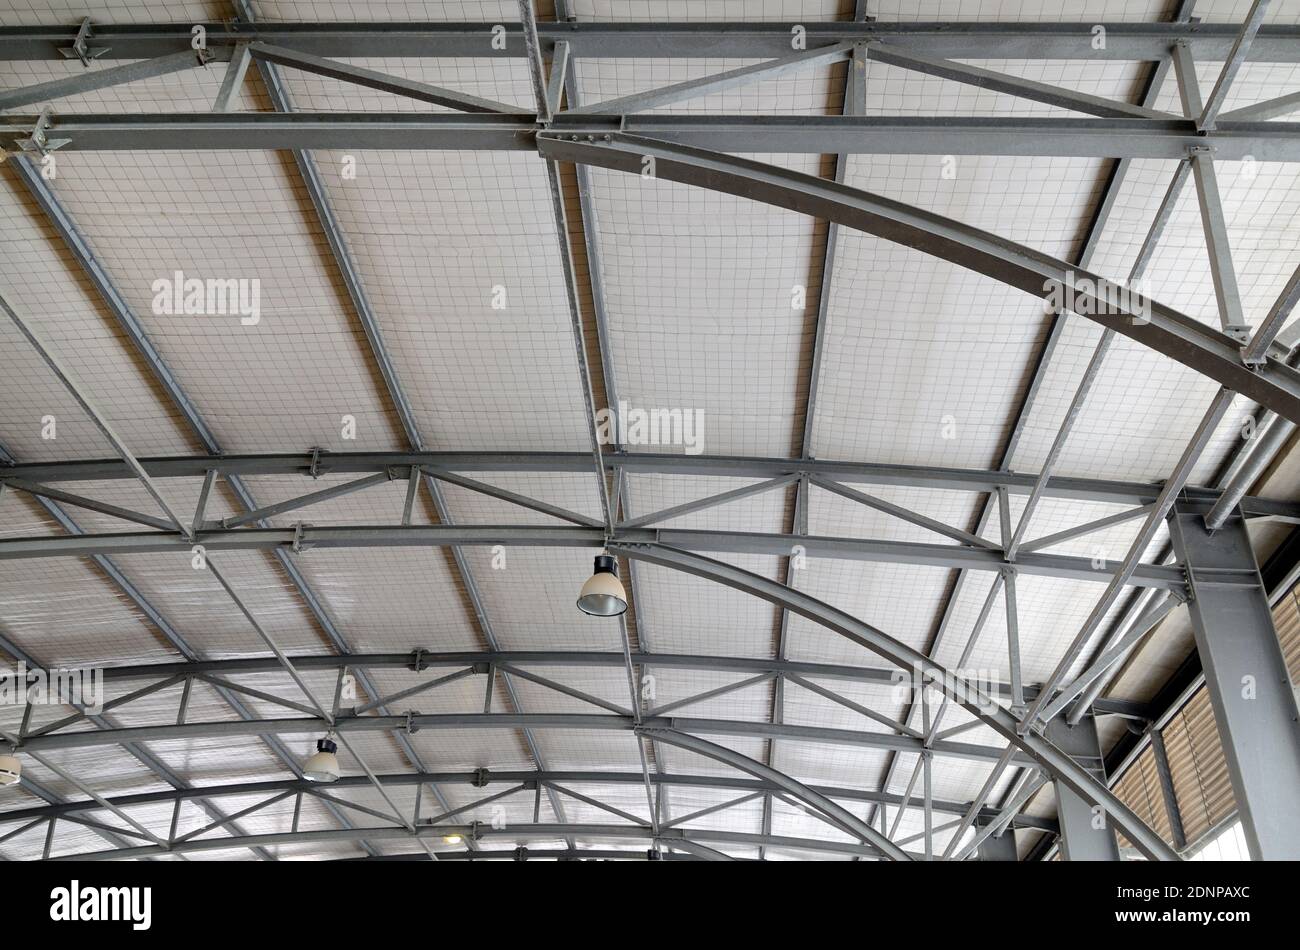 Metal Roof Frame or Roof Structure of Indoor Stadium Building with Metal Beams and Trusses Stock Photo